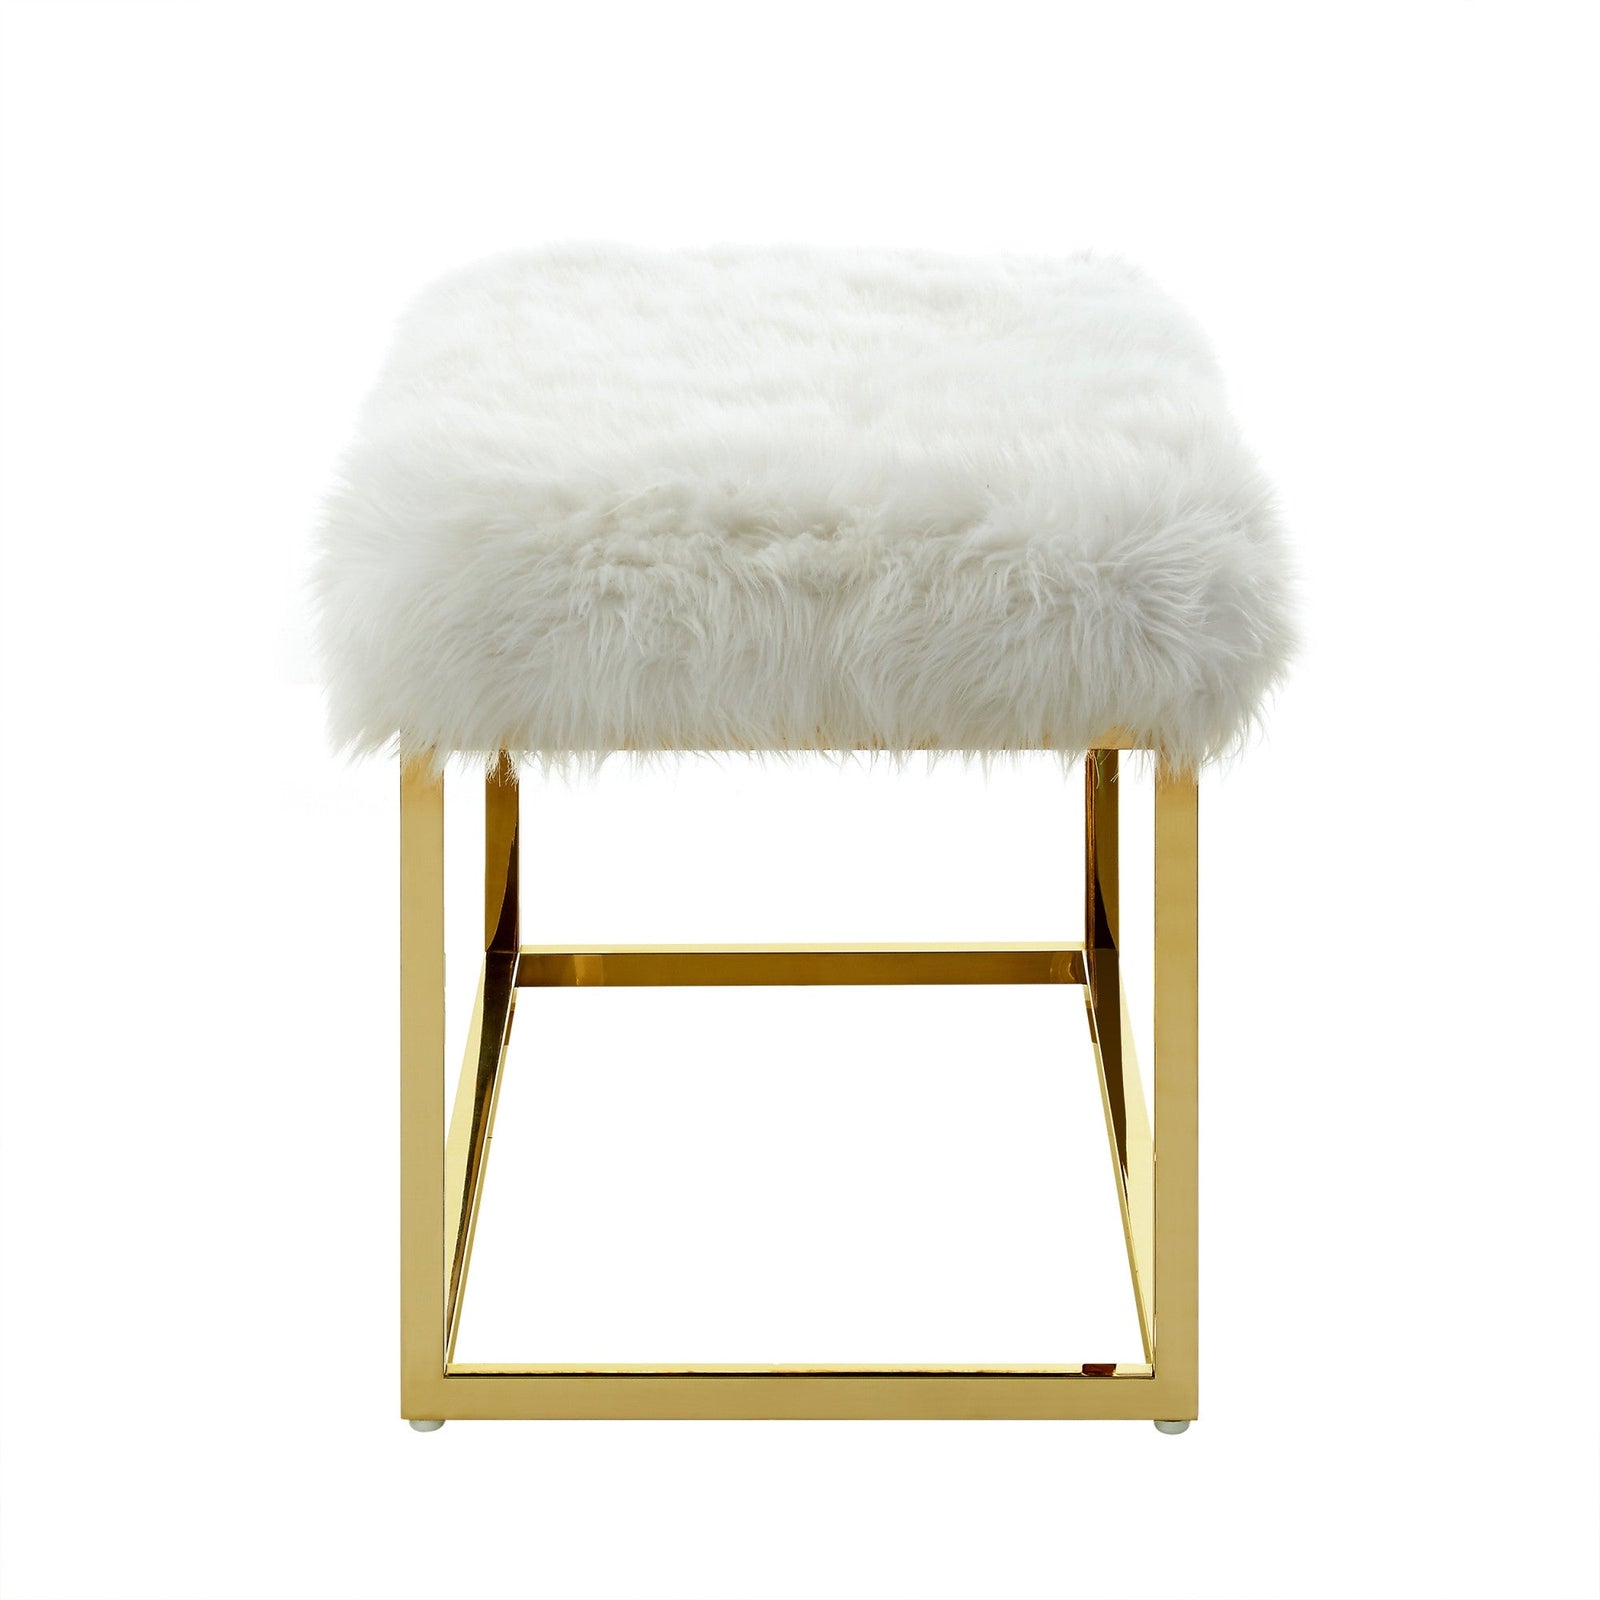 19" White Faux Fur and Gold Upholstered Bench